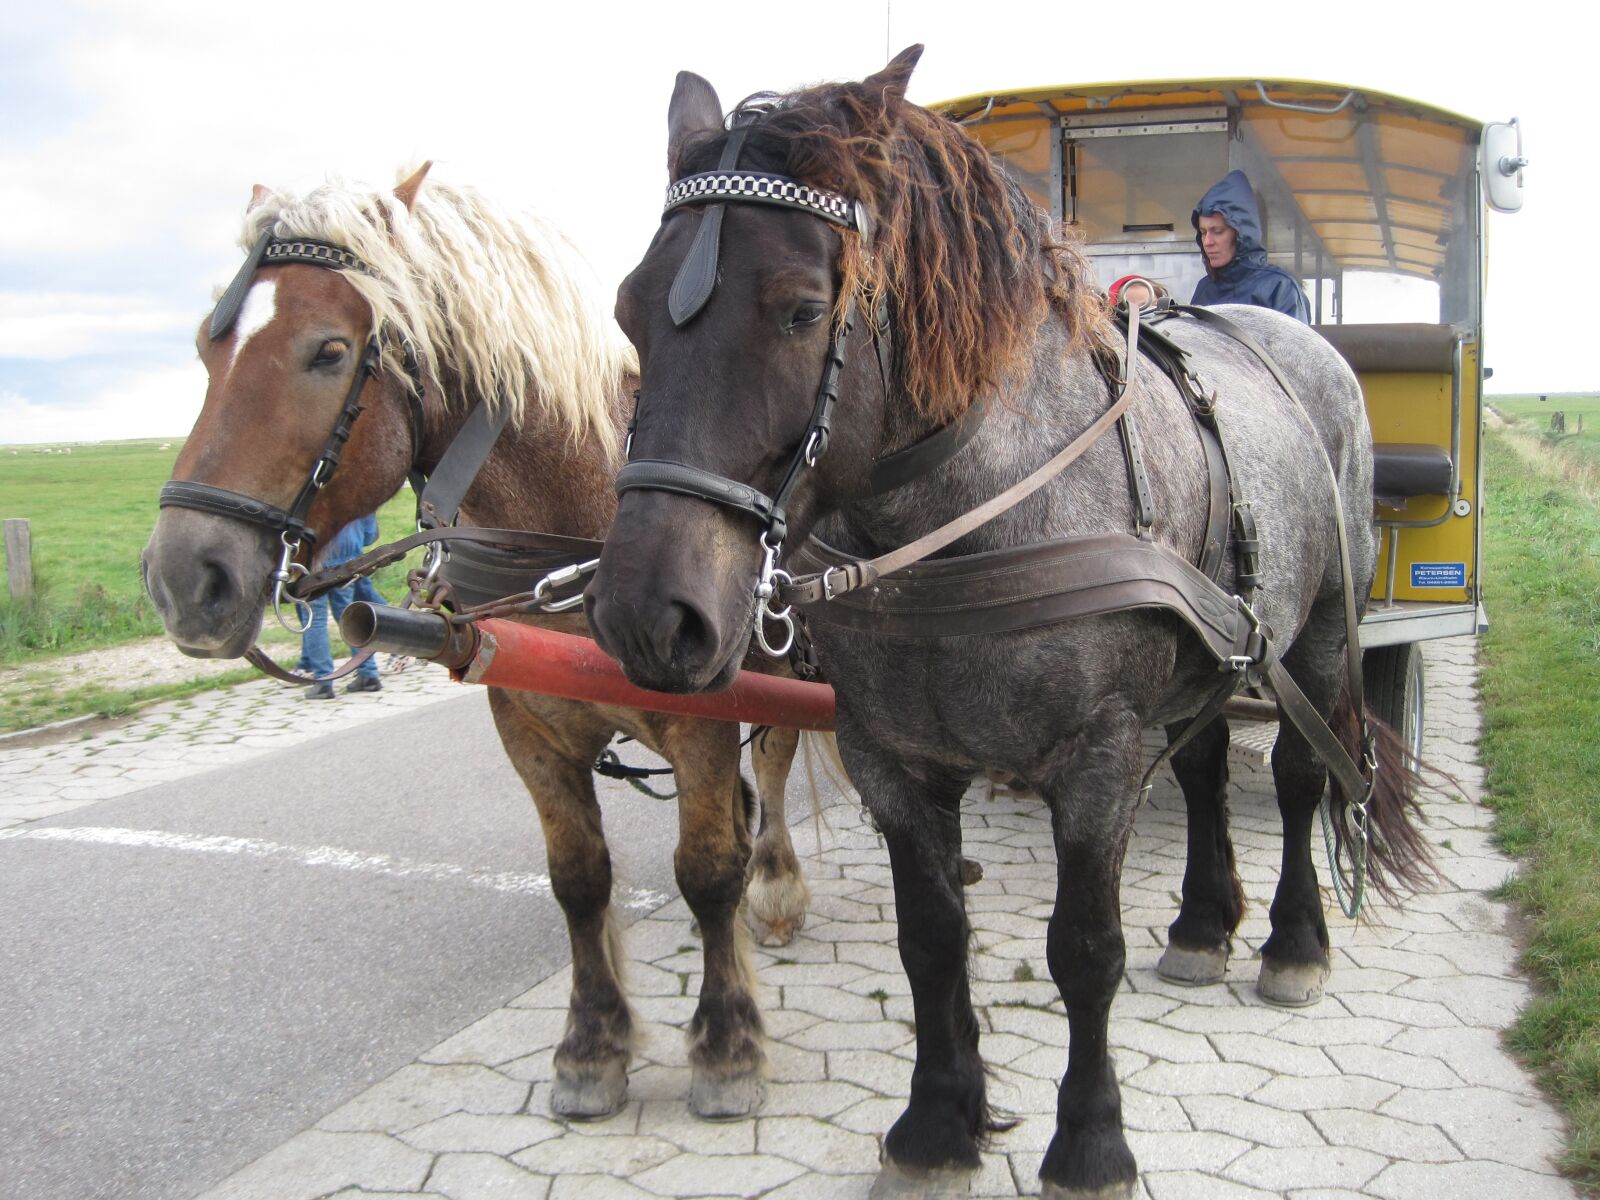 Canon PowerShot SD1200 IS (Digital IXUS 95 IS / IXY Digital 110 IS) sample photo. Horse drawn carriage, horses photography